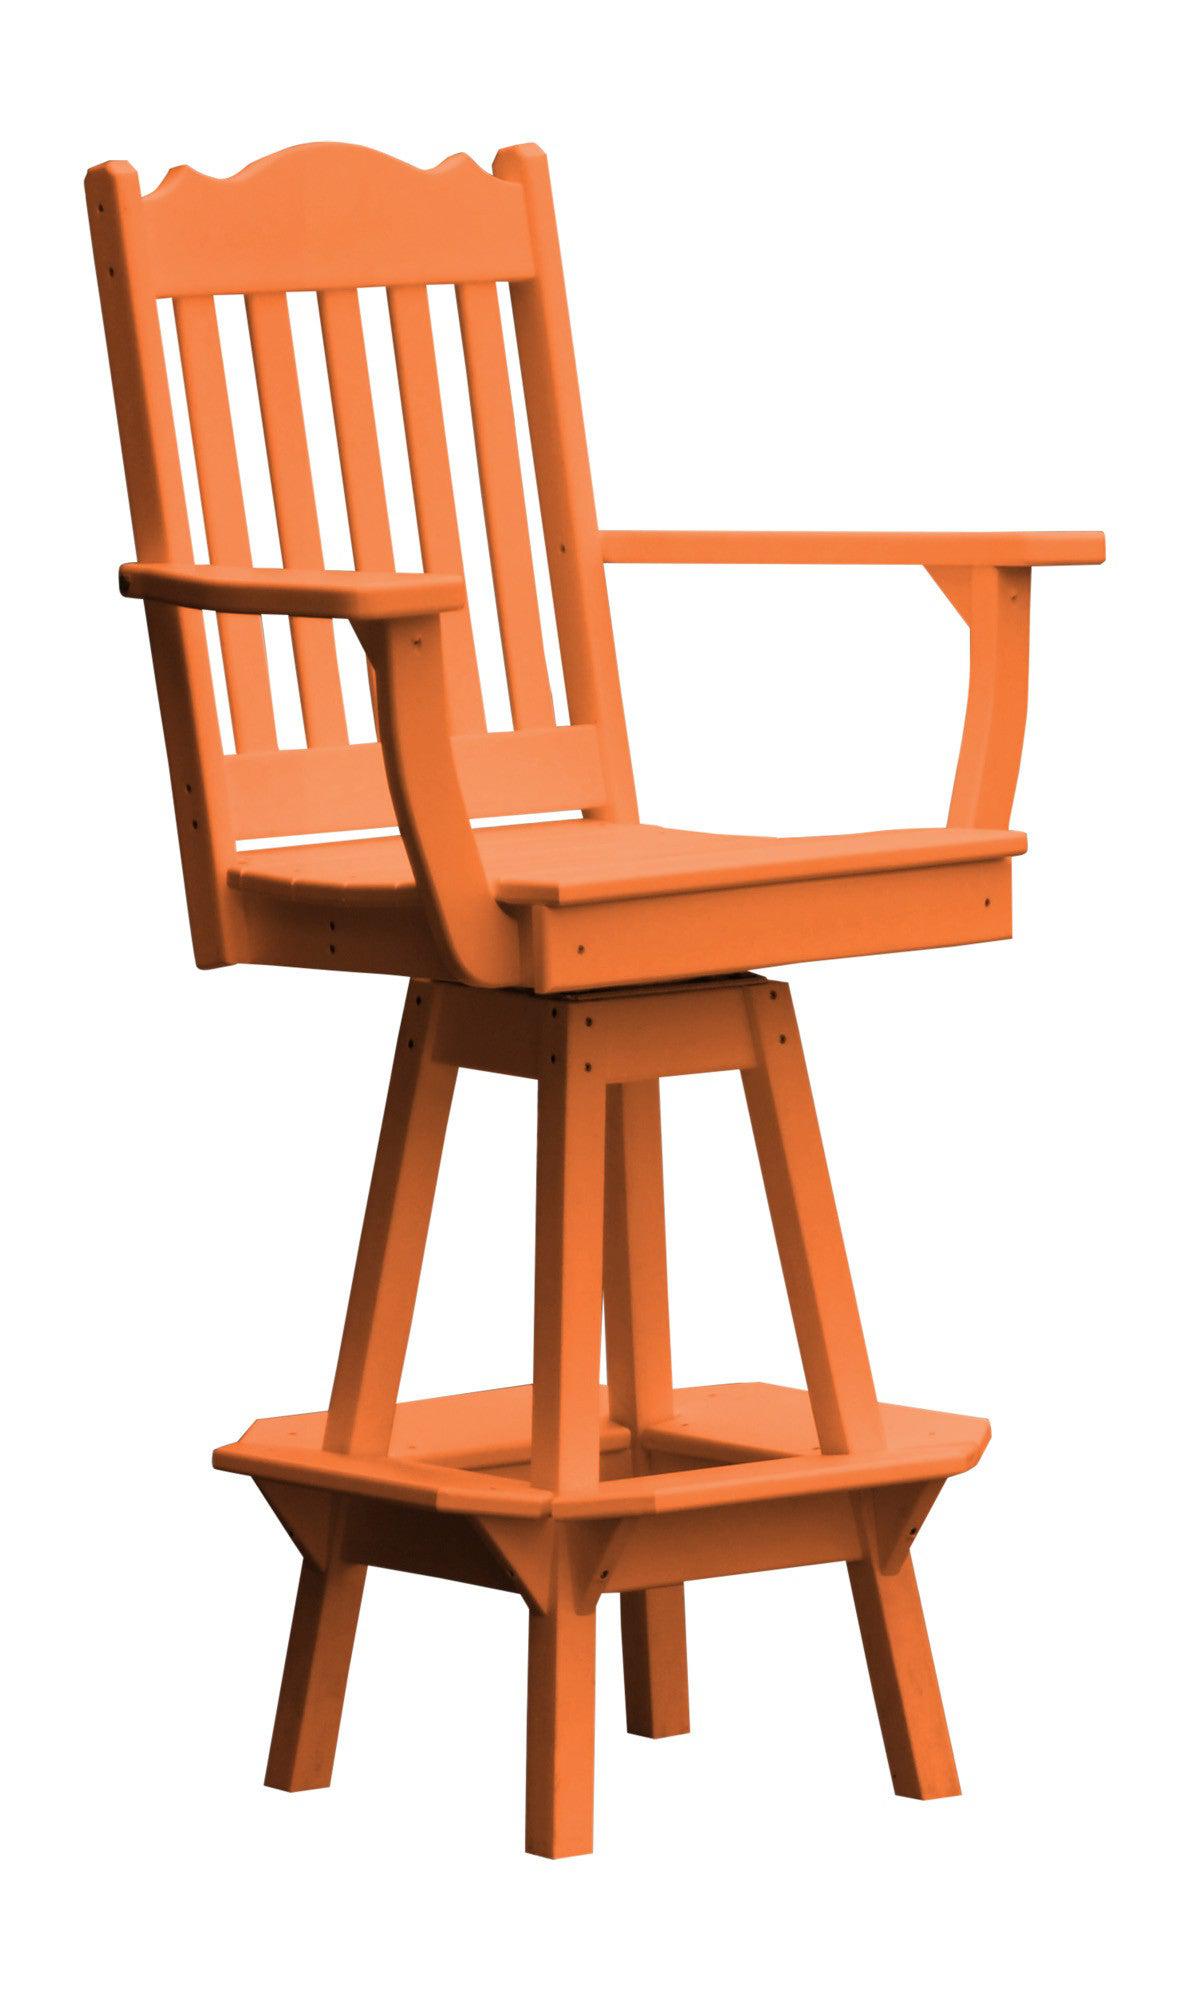 A&L Furniture Company Recycled Plastic Royal Swivel Bar Chair w/ Arms - Orange